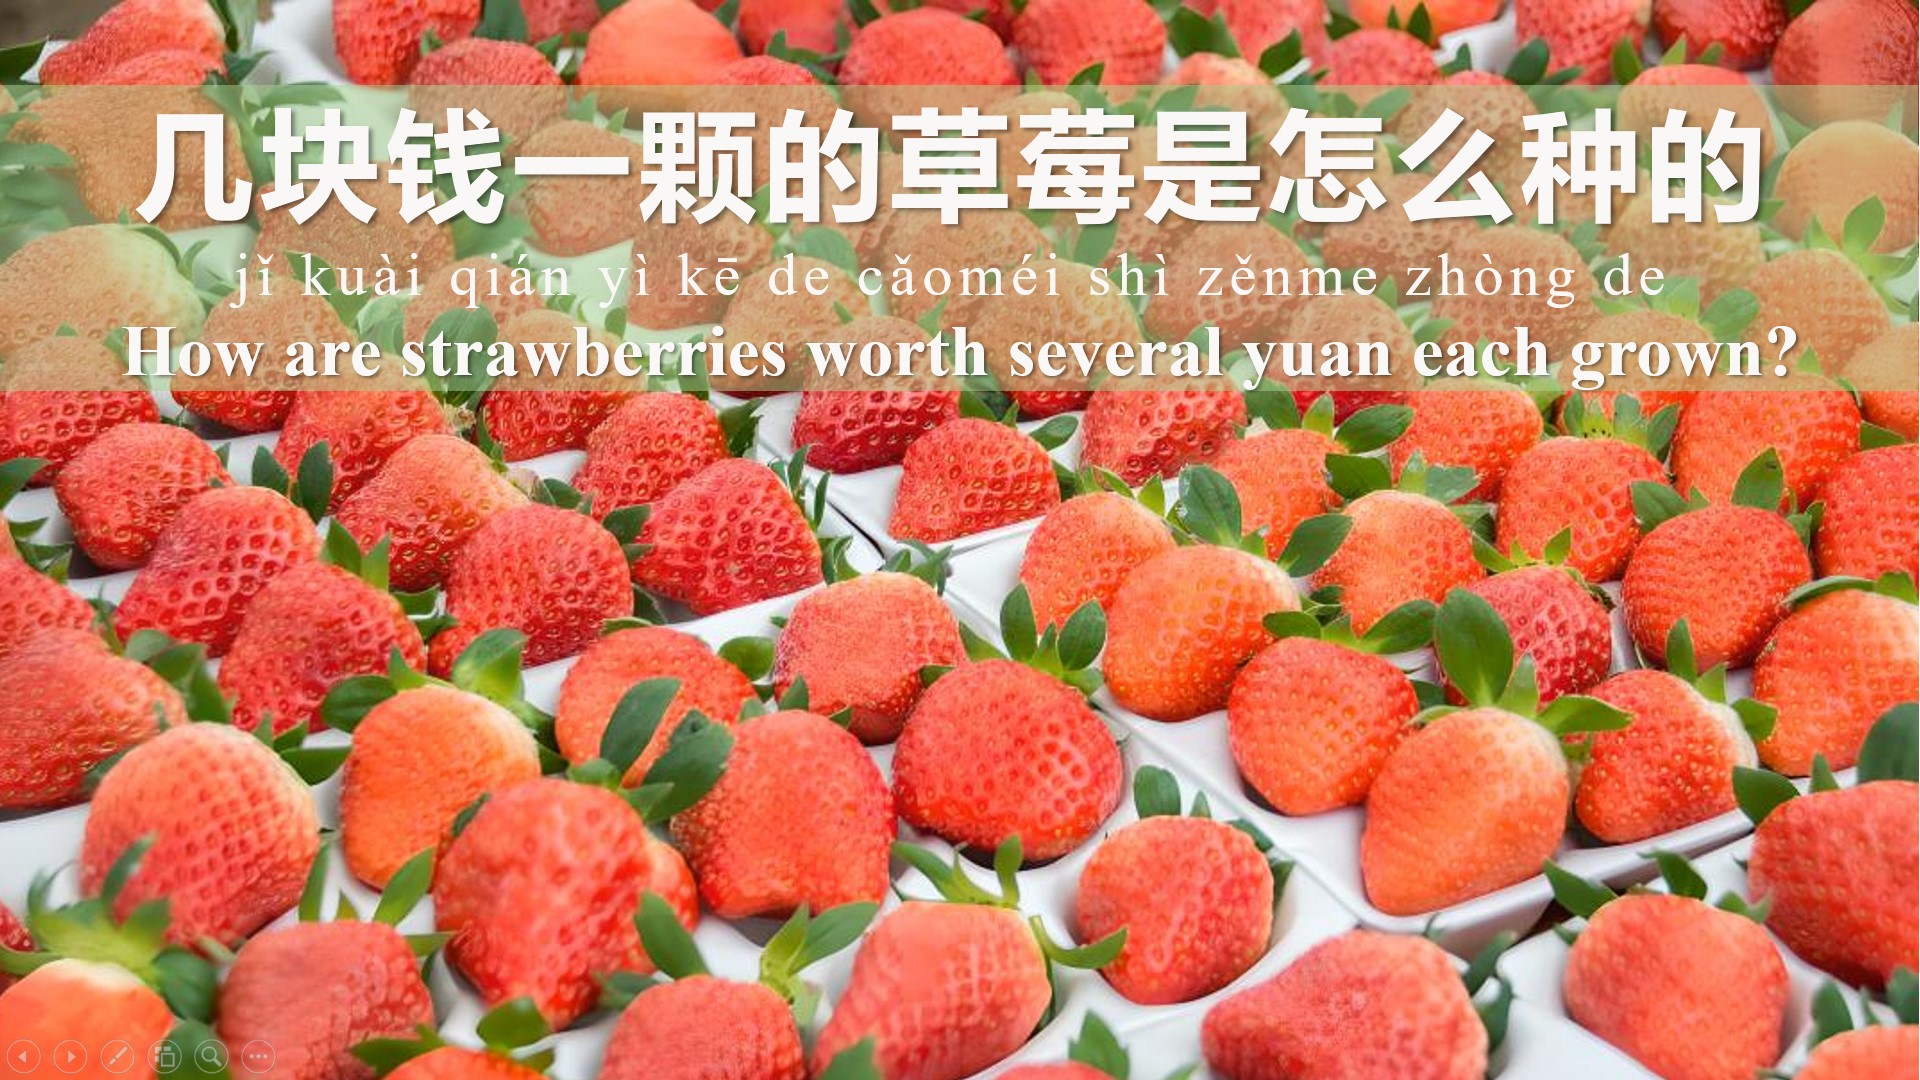 How are strawberries worth several yuan each grown?